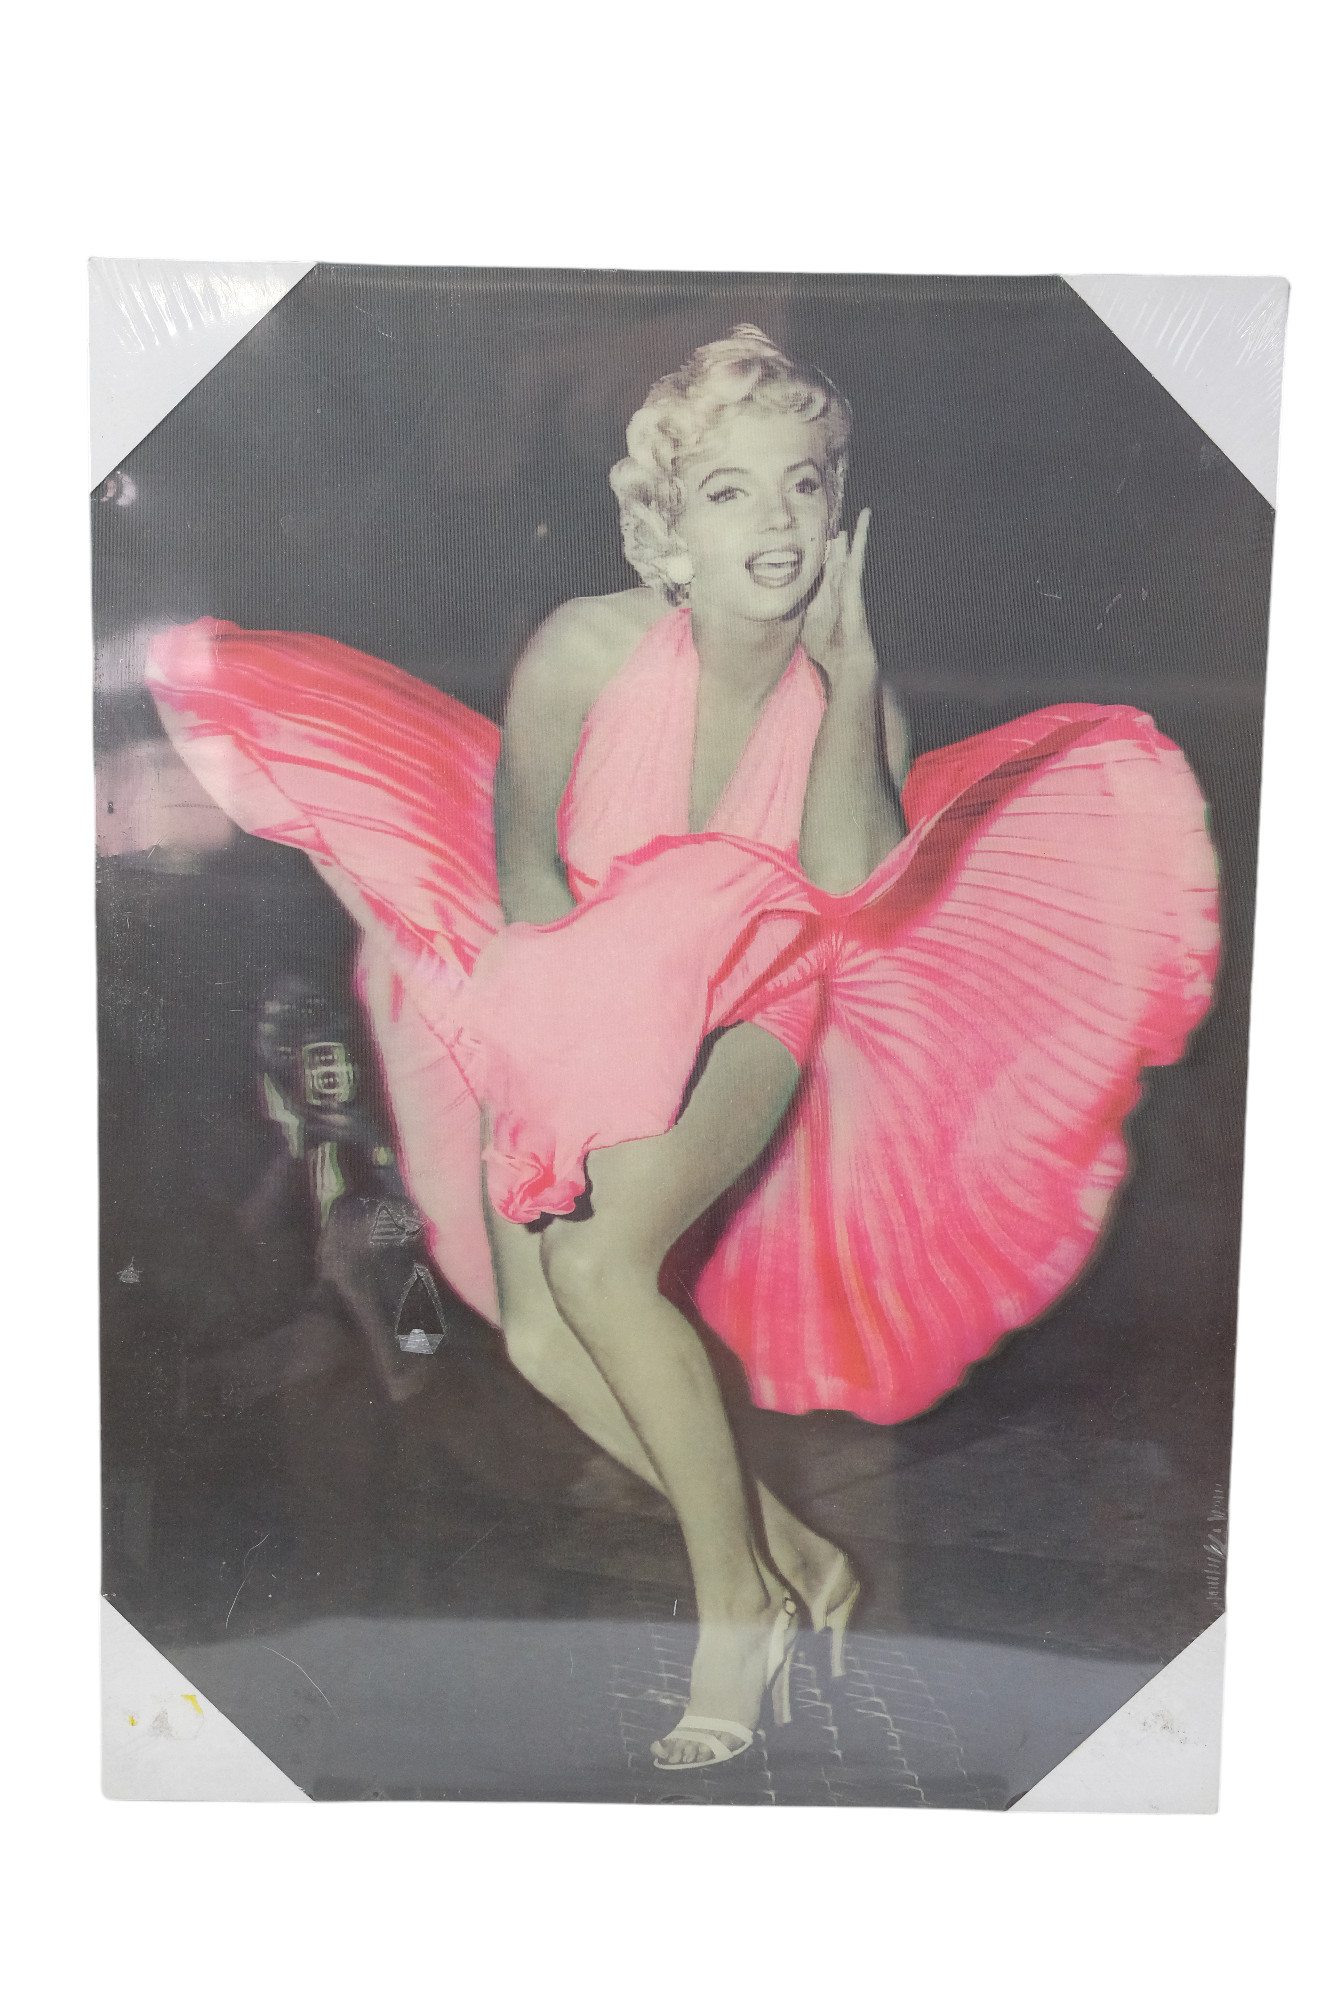 A collection of Marilyn Monroe memorabilia including bags, books, etc - Image 4 of 9